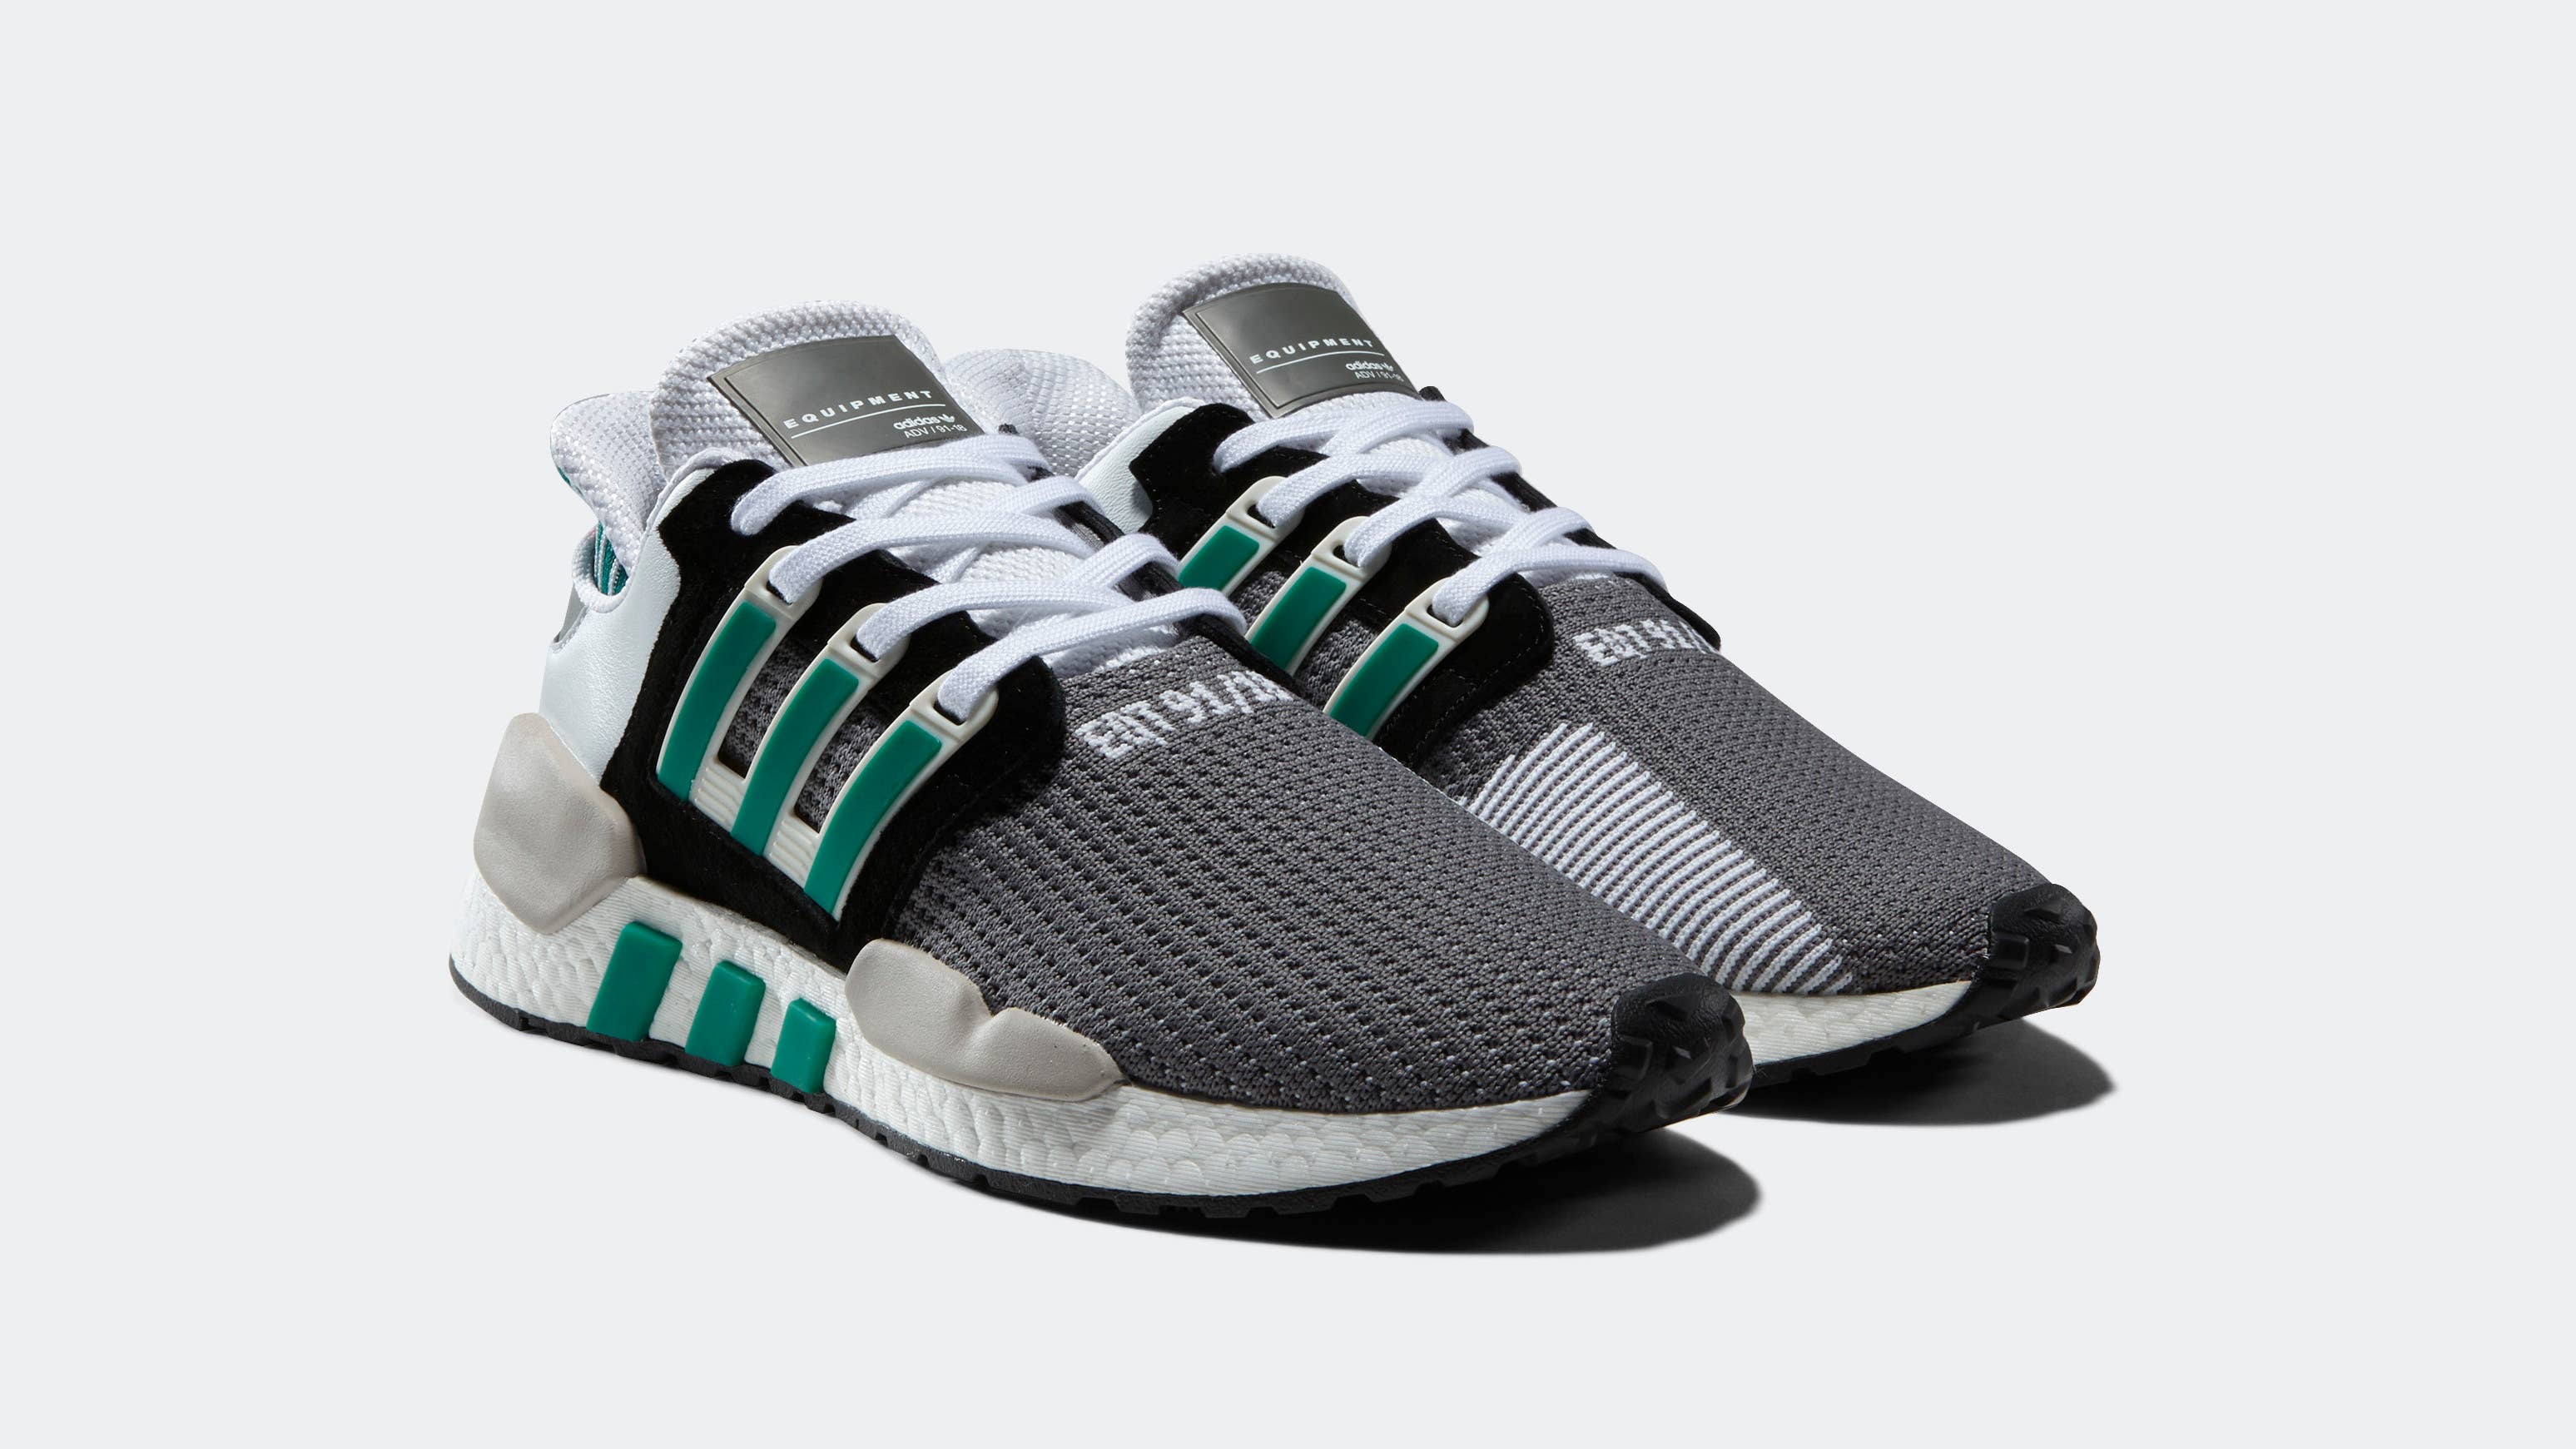 Misterio nuestra repetir Adidas Introduces a New EQT Boost Sneaker | Complex